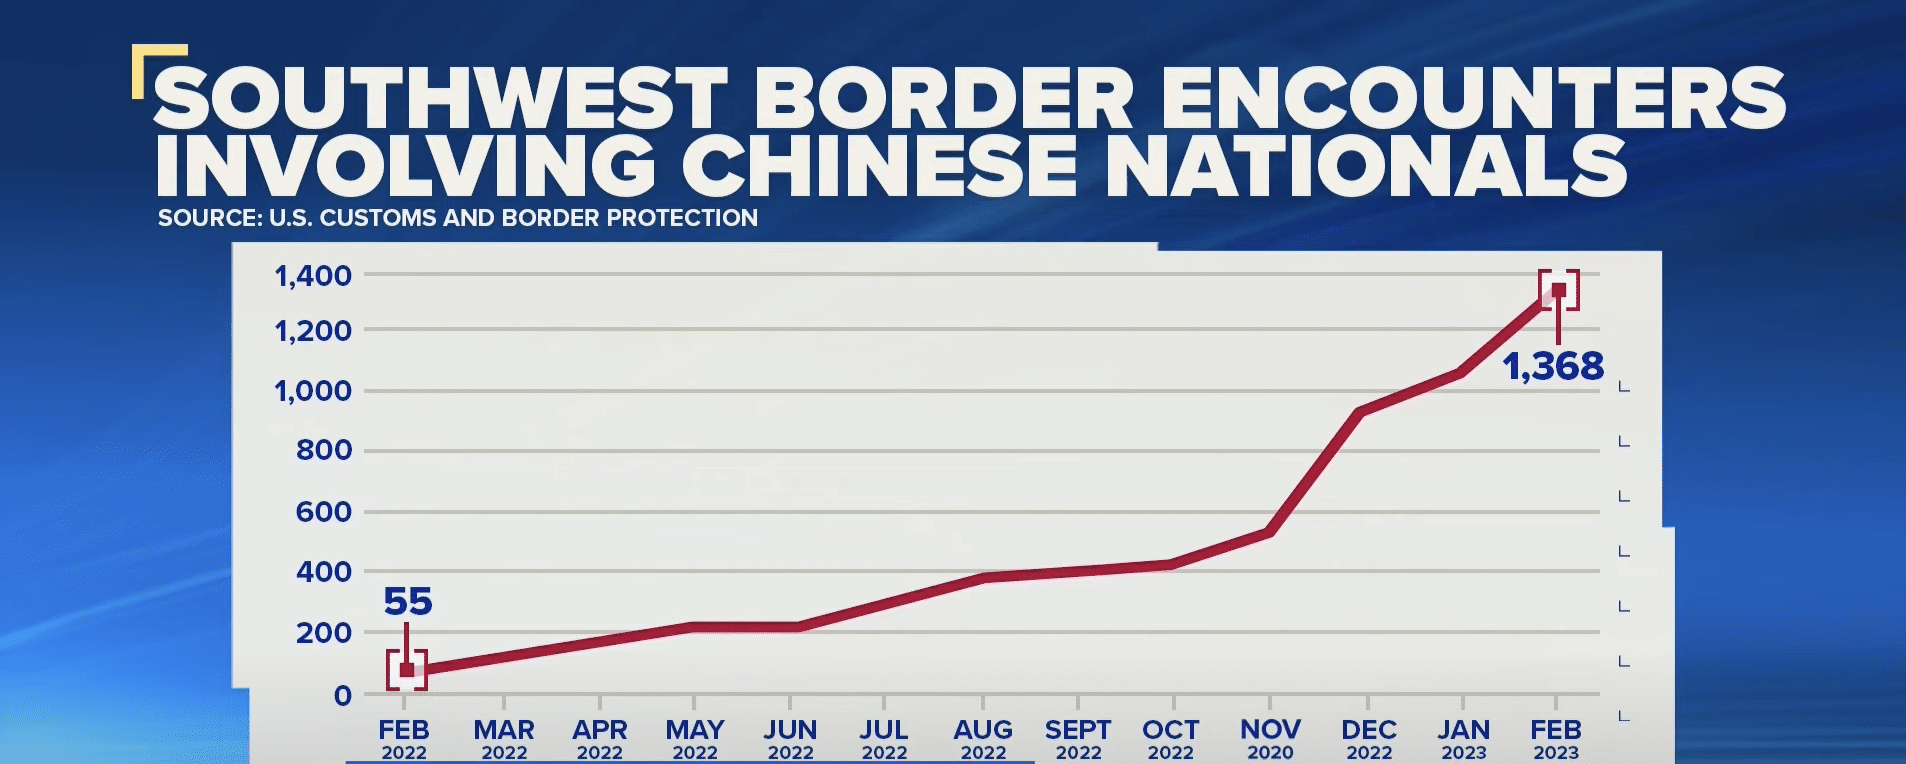 (WATCH) Why are so many Chinese Nationals suddenly “Migrating” across our Southern border?